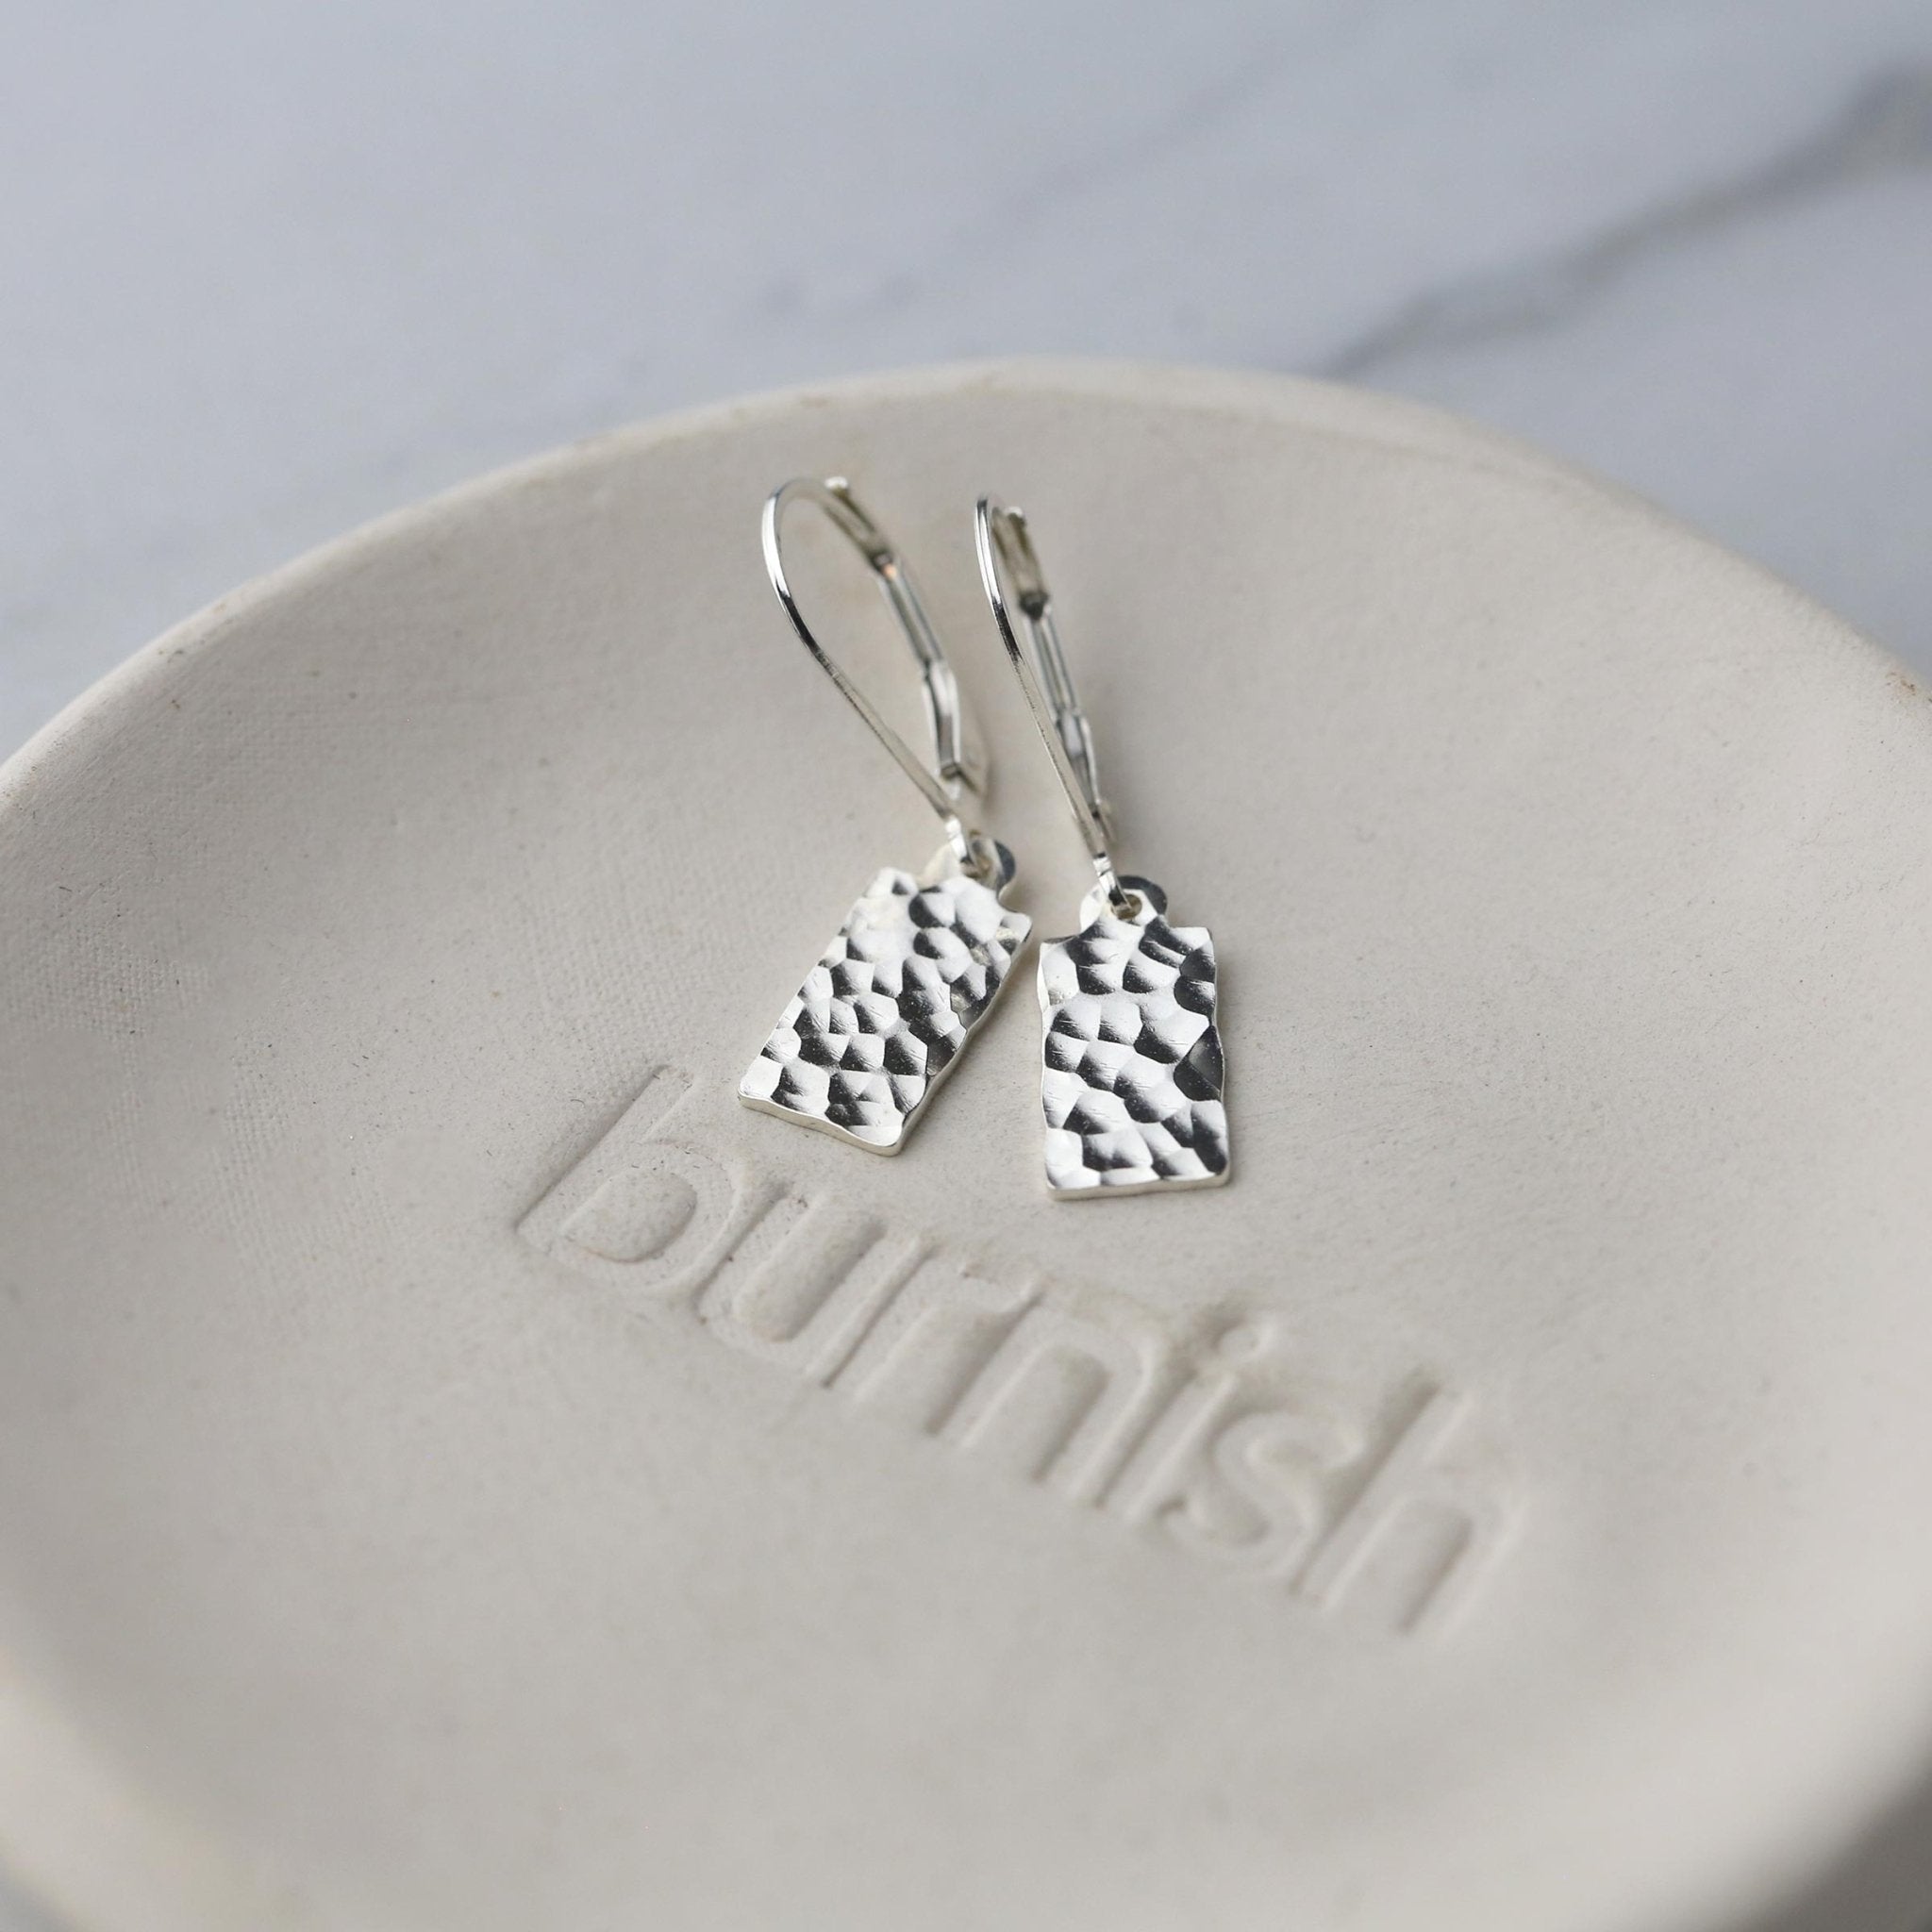 Hammered Silver Mini Tag Lever-back Earrings handmade by Burnish